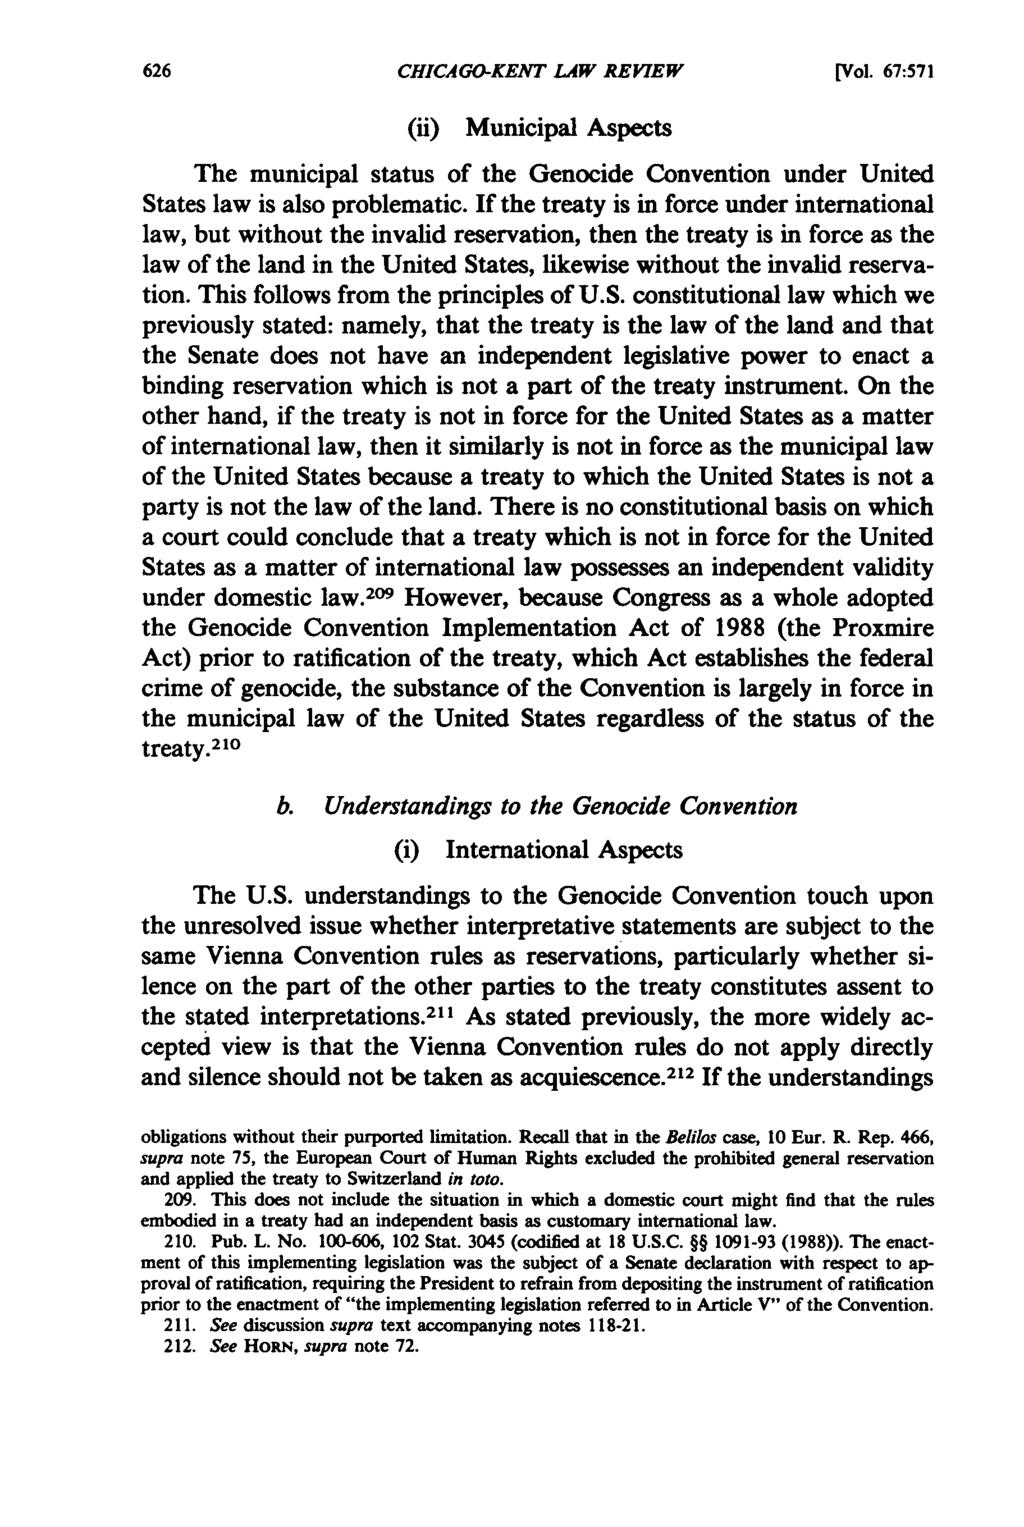 CHICAGO-KENT LAW REVIEW [Vol. 67:571 (ii) Municipal Aspects The municipal status of the Genocide Convention under United States law is also problematic.